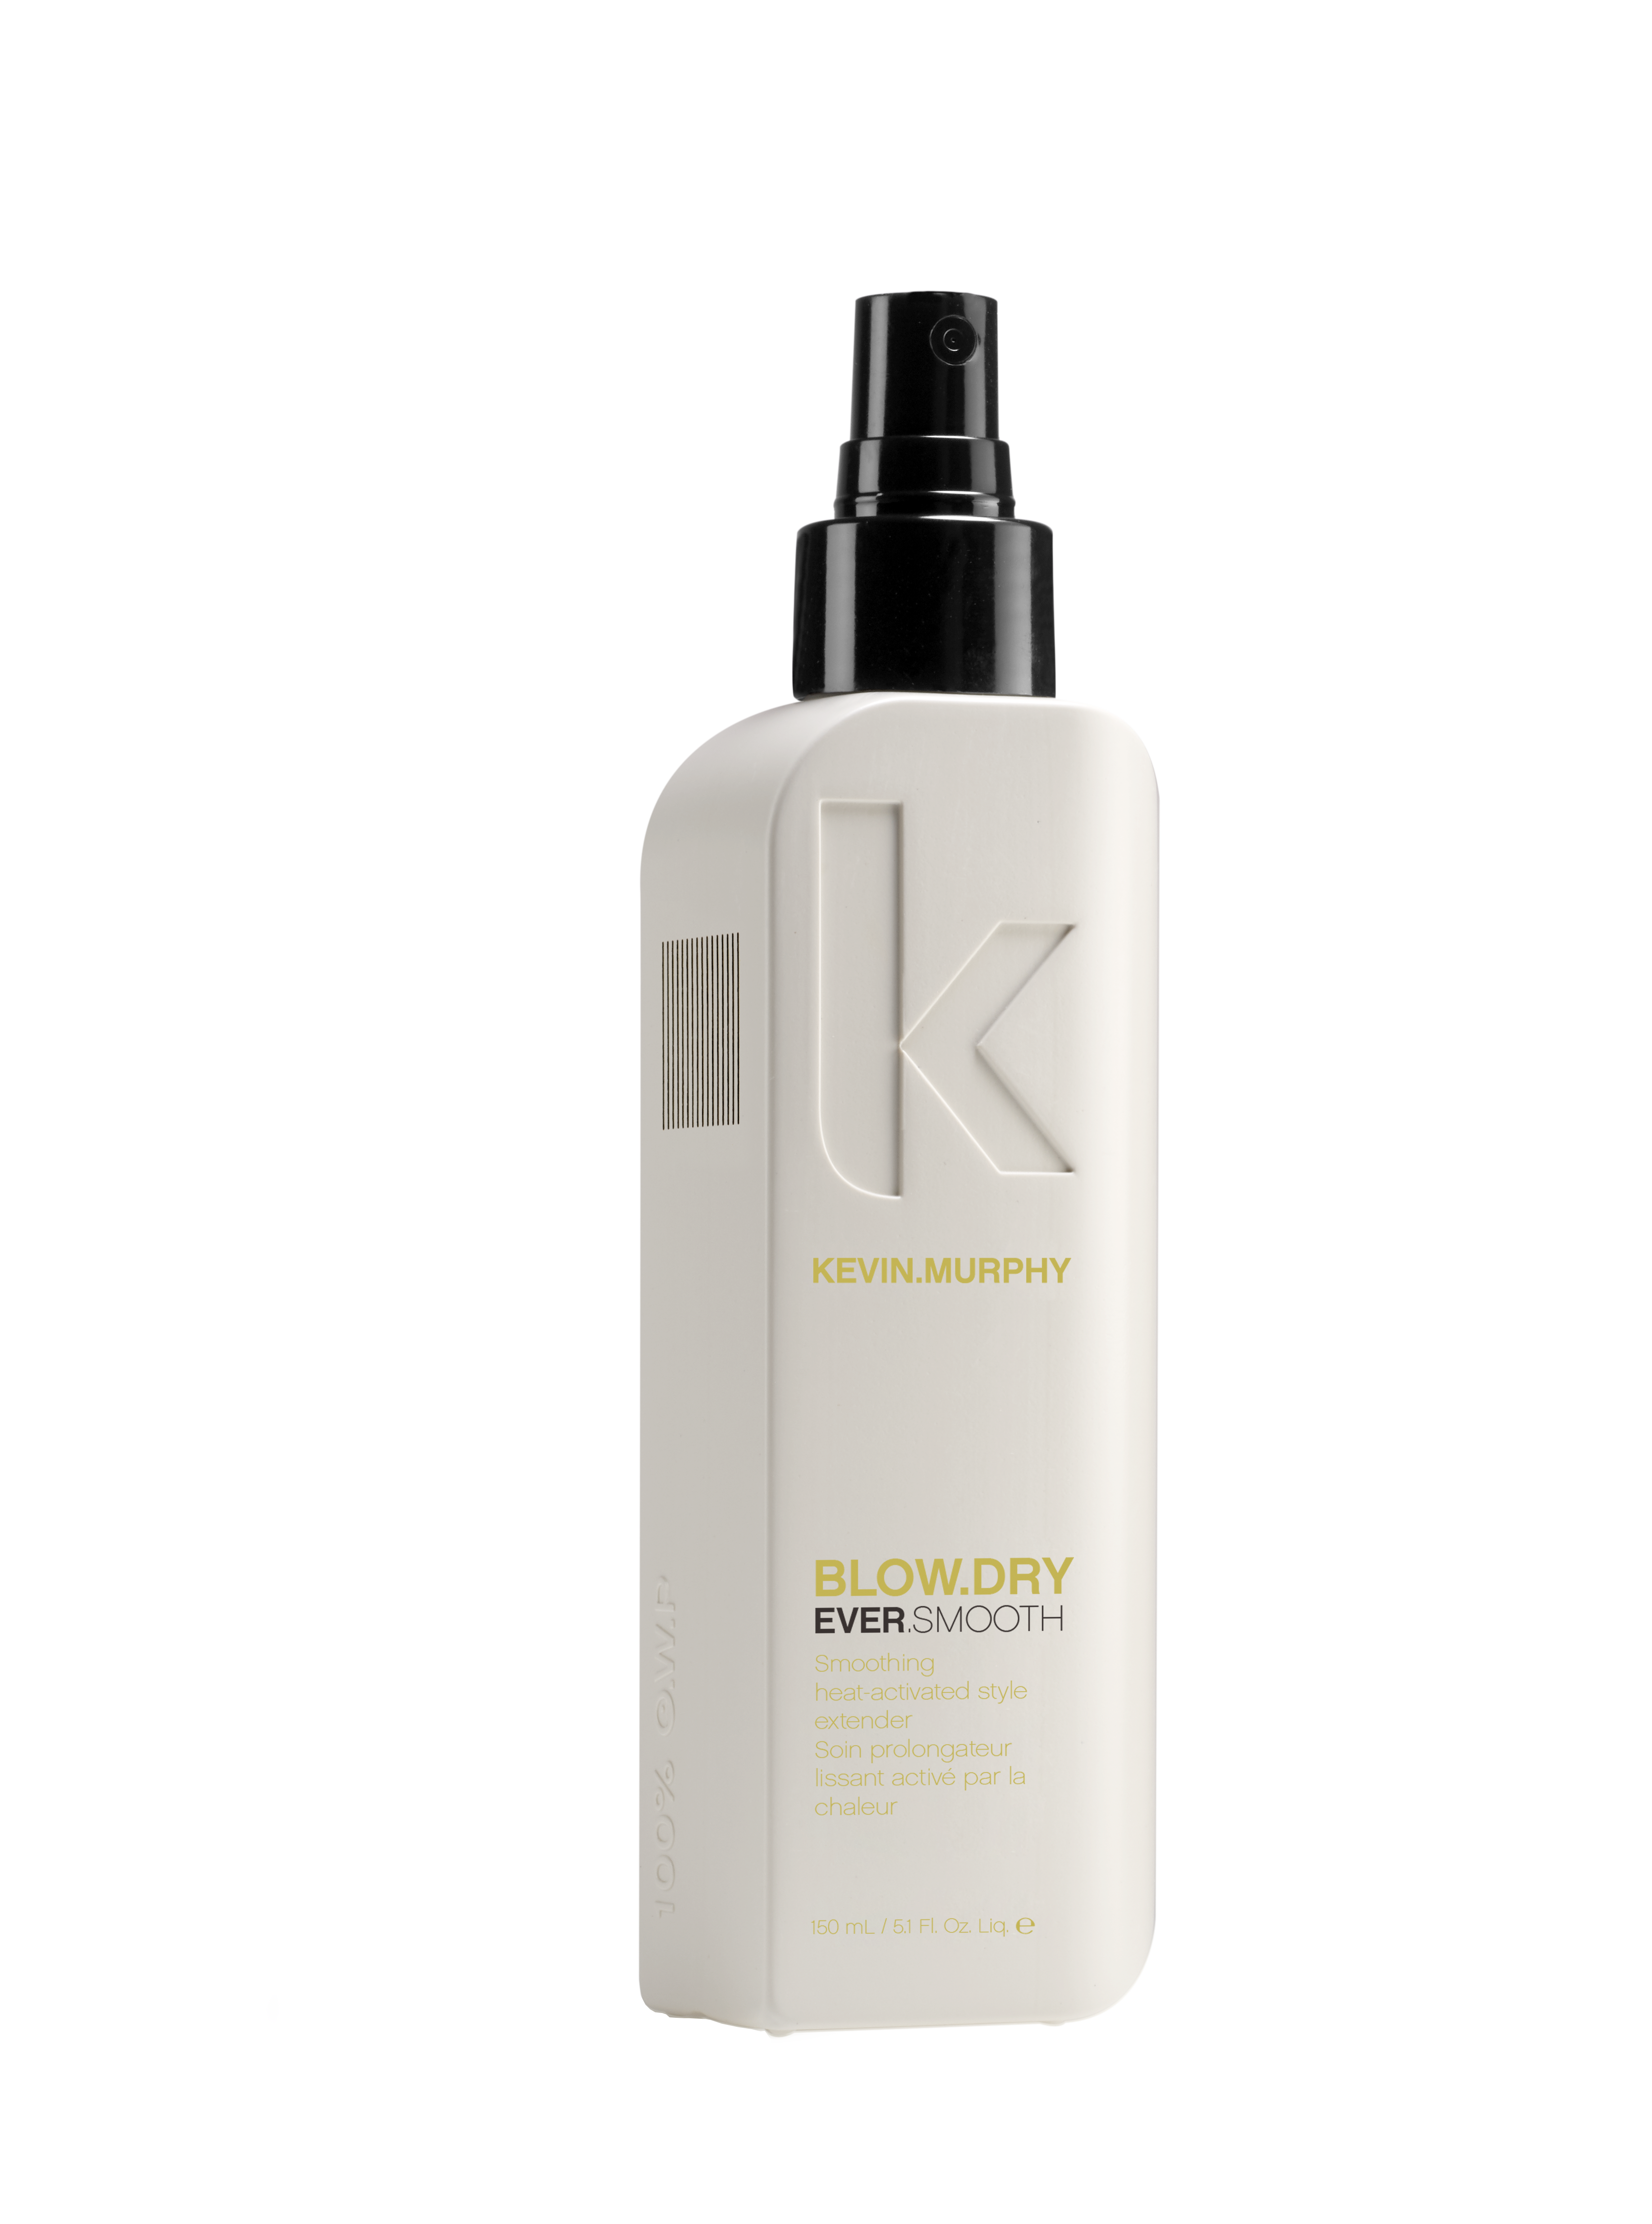 KEVIN.MURPHY BLOW.DRY EVER.SMOOTH